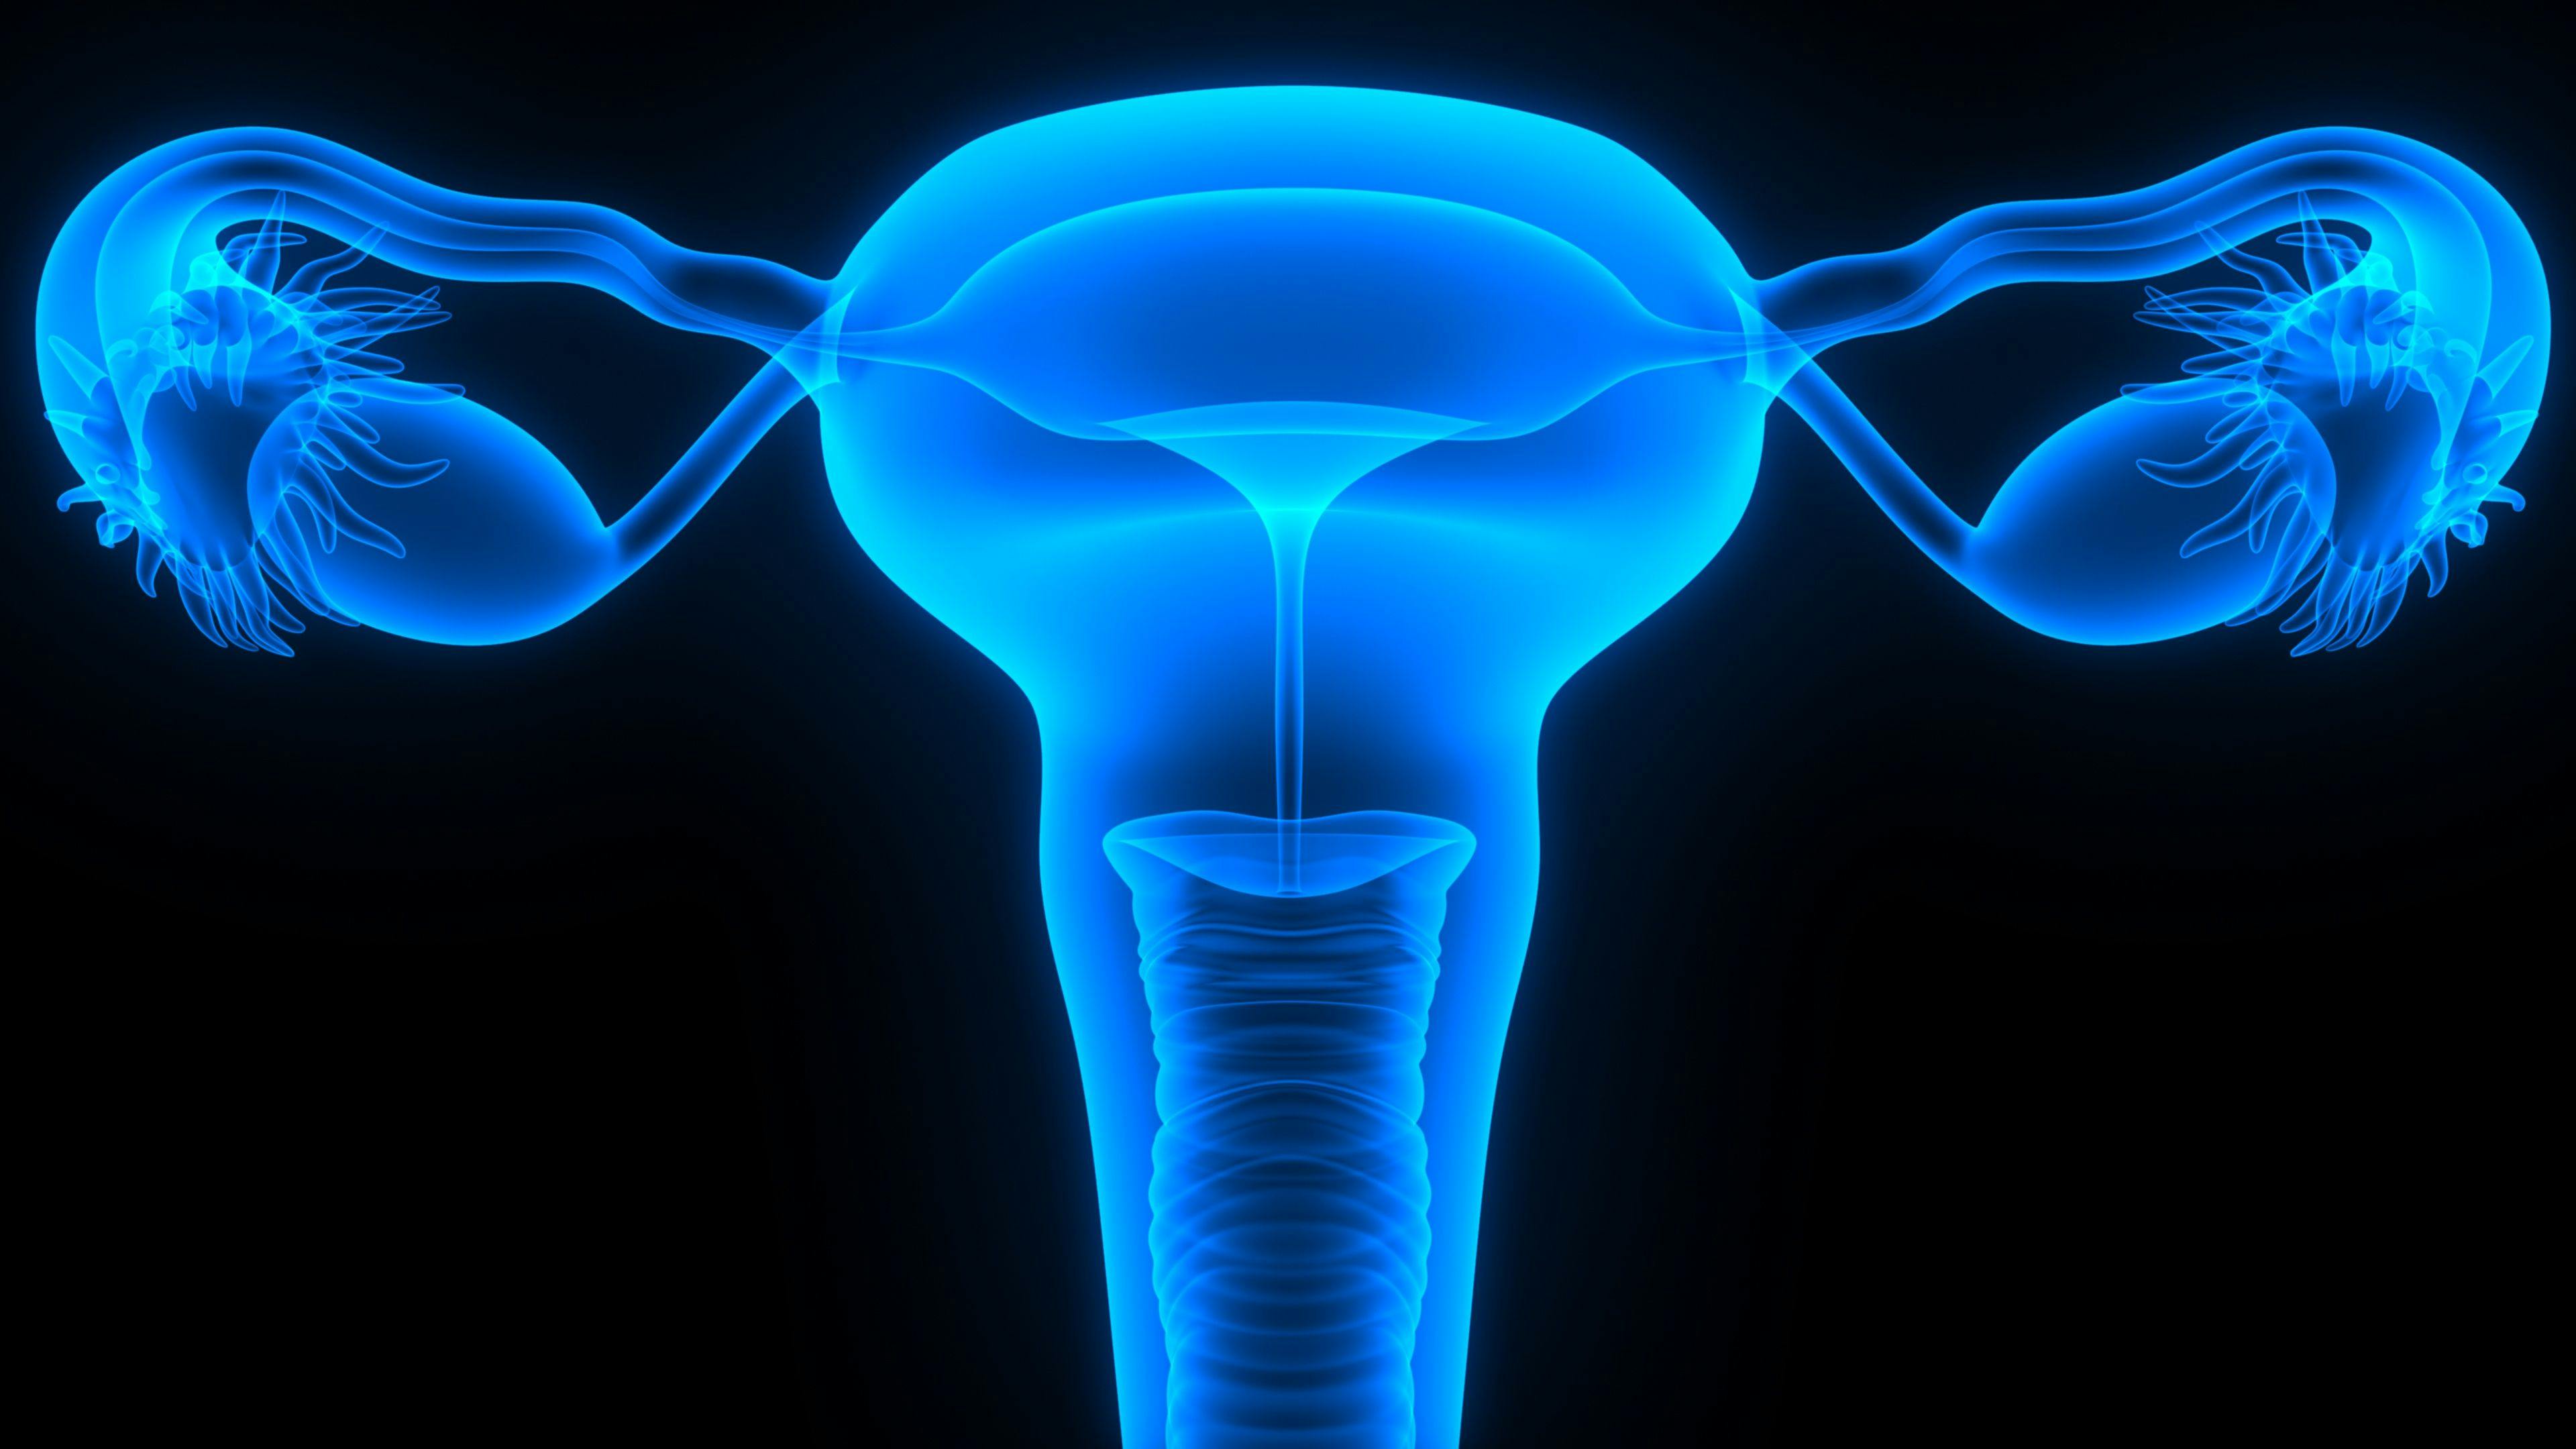 Potentially Game-Changing Clinical Trials in Endometrial Cancer Seek to Evaluate Immunotherapeutic Approaches